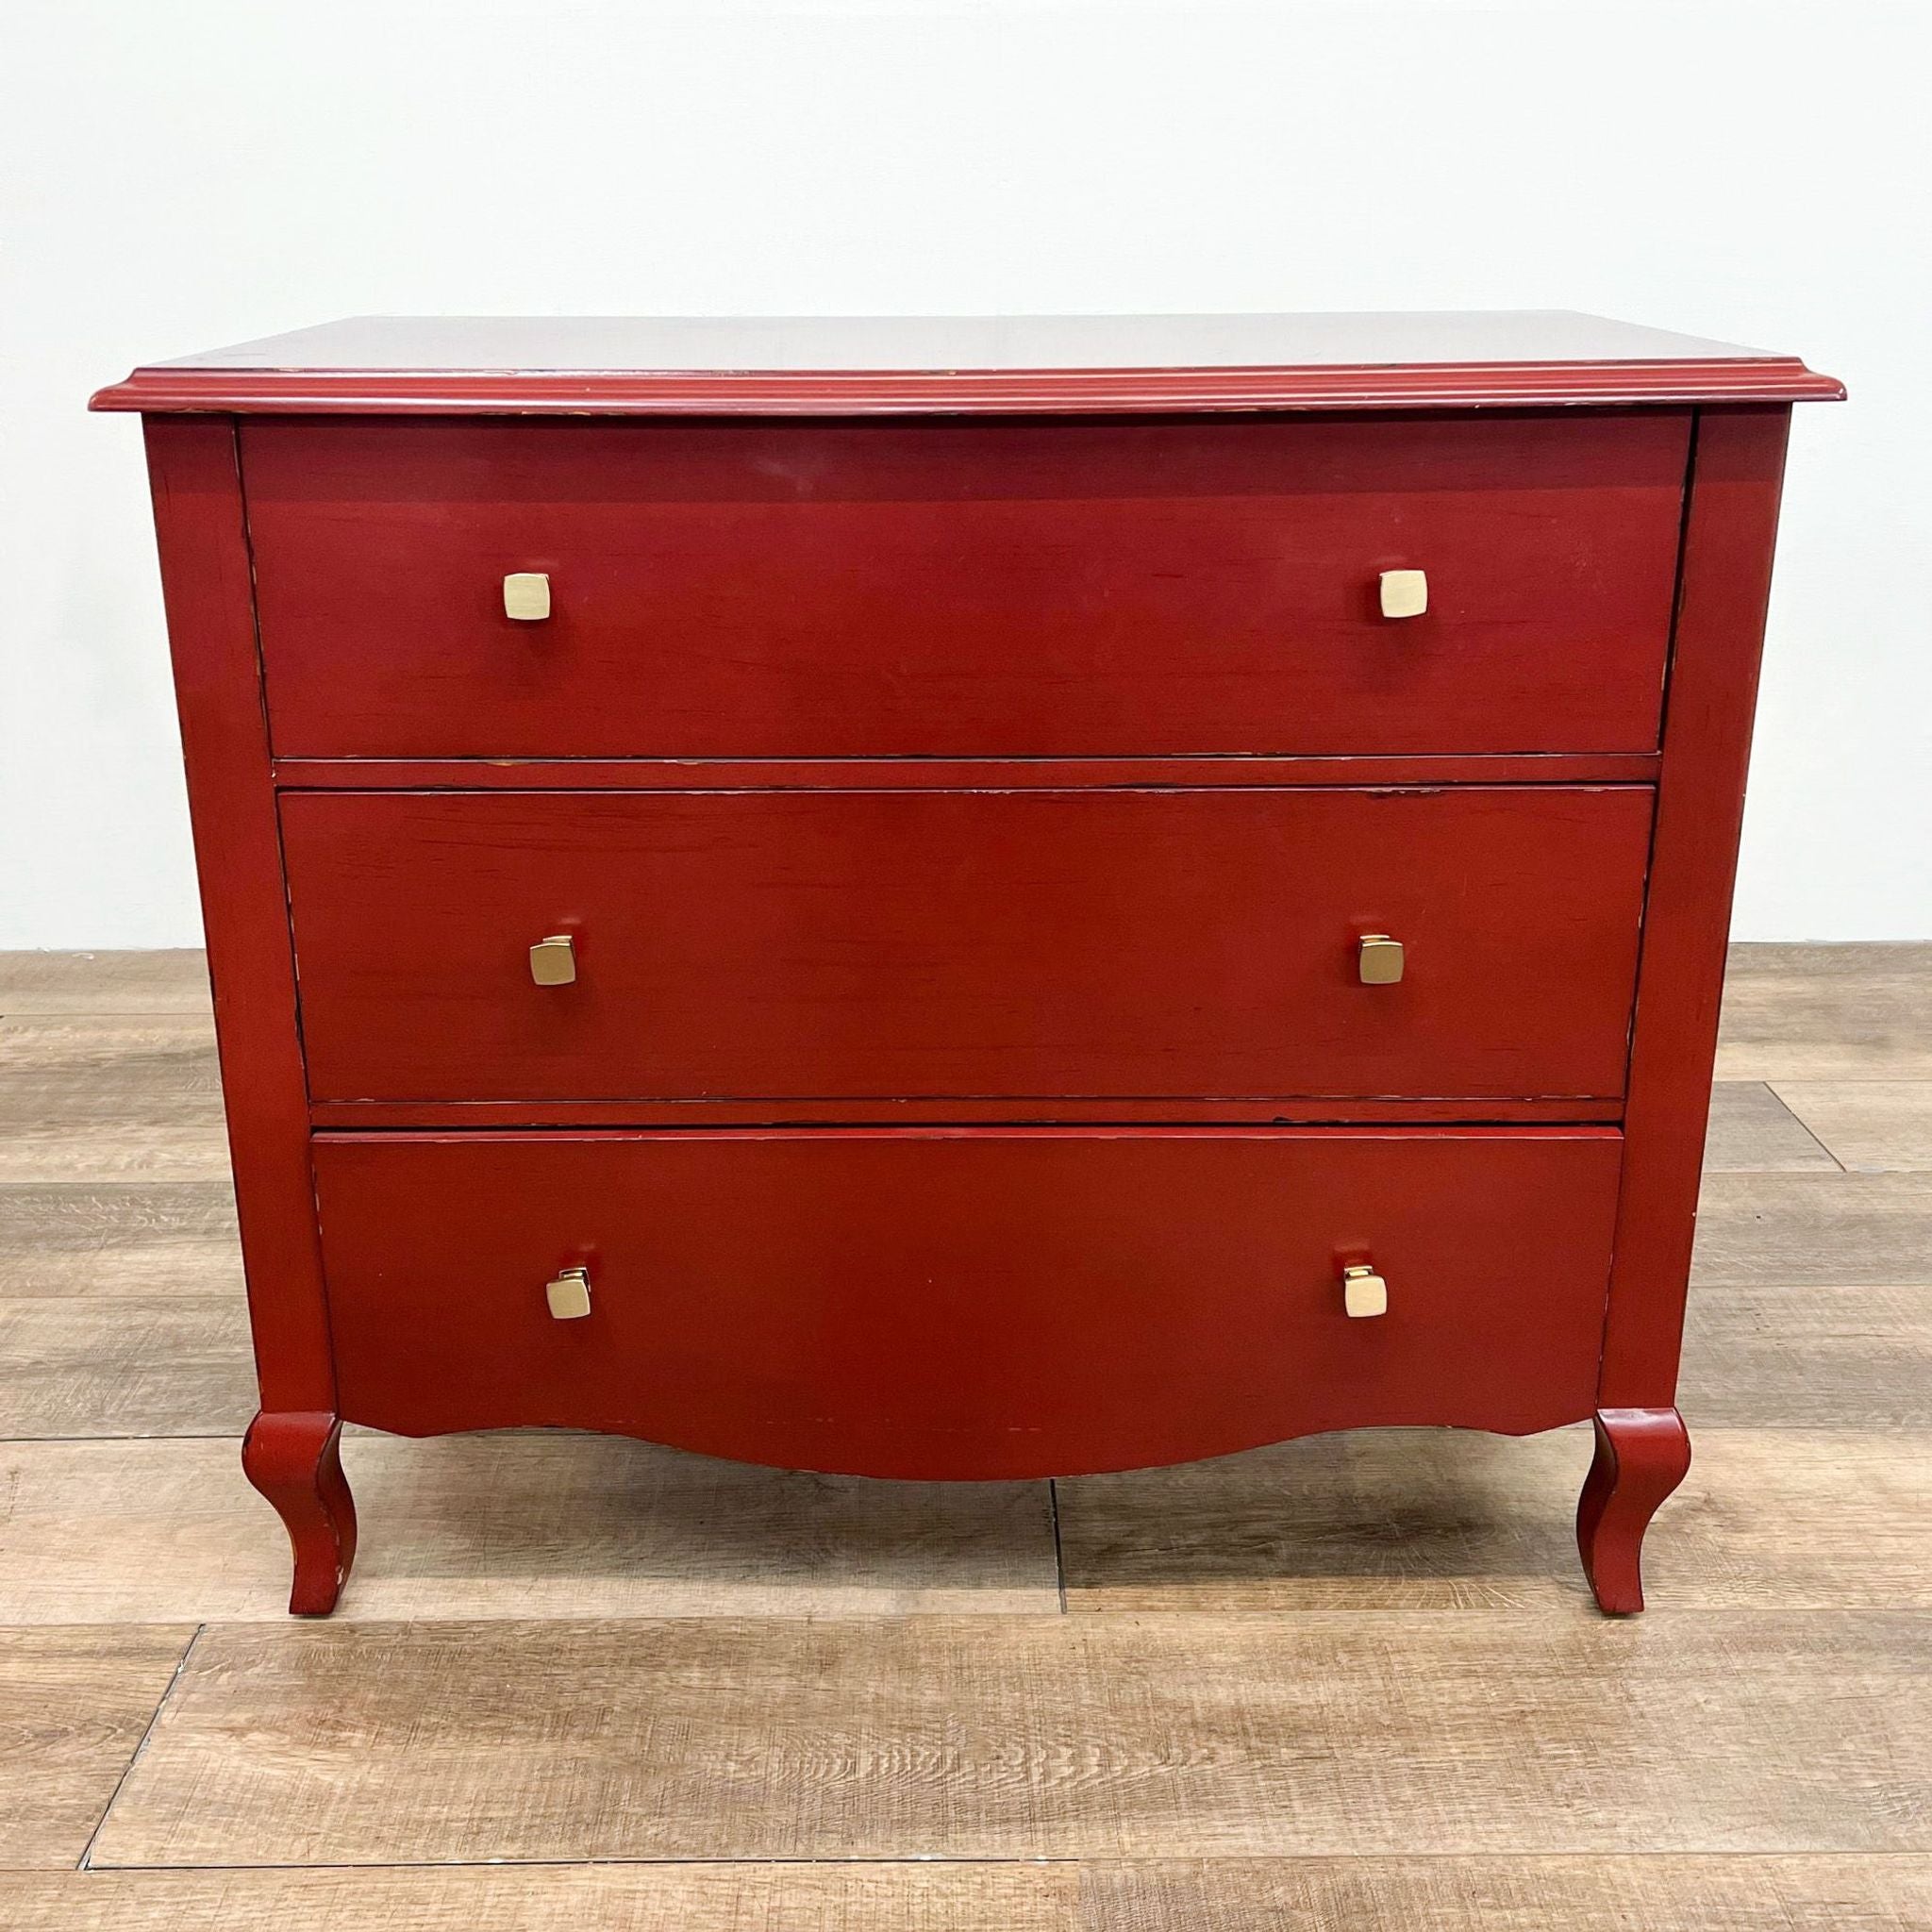 Pottery Barn red Luca 3-drawer dresser on a wooden floor, closed drawers with brass knobs.